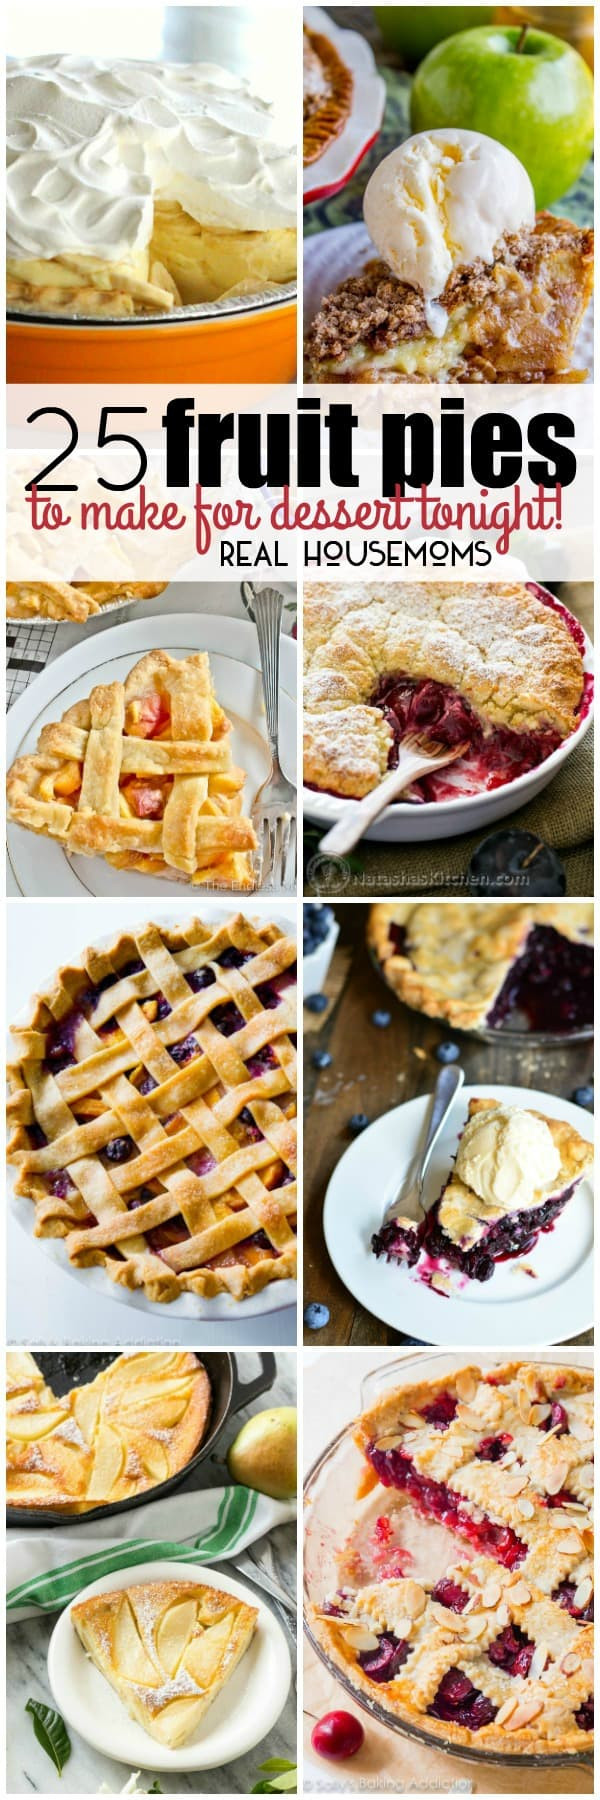 Fruit Pies List
 25 Fruit Pies to Make for Dessert Tonight ⋆ Real Housemoms